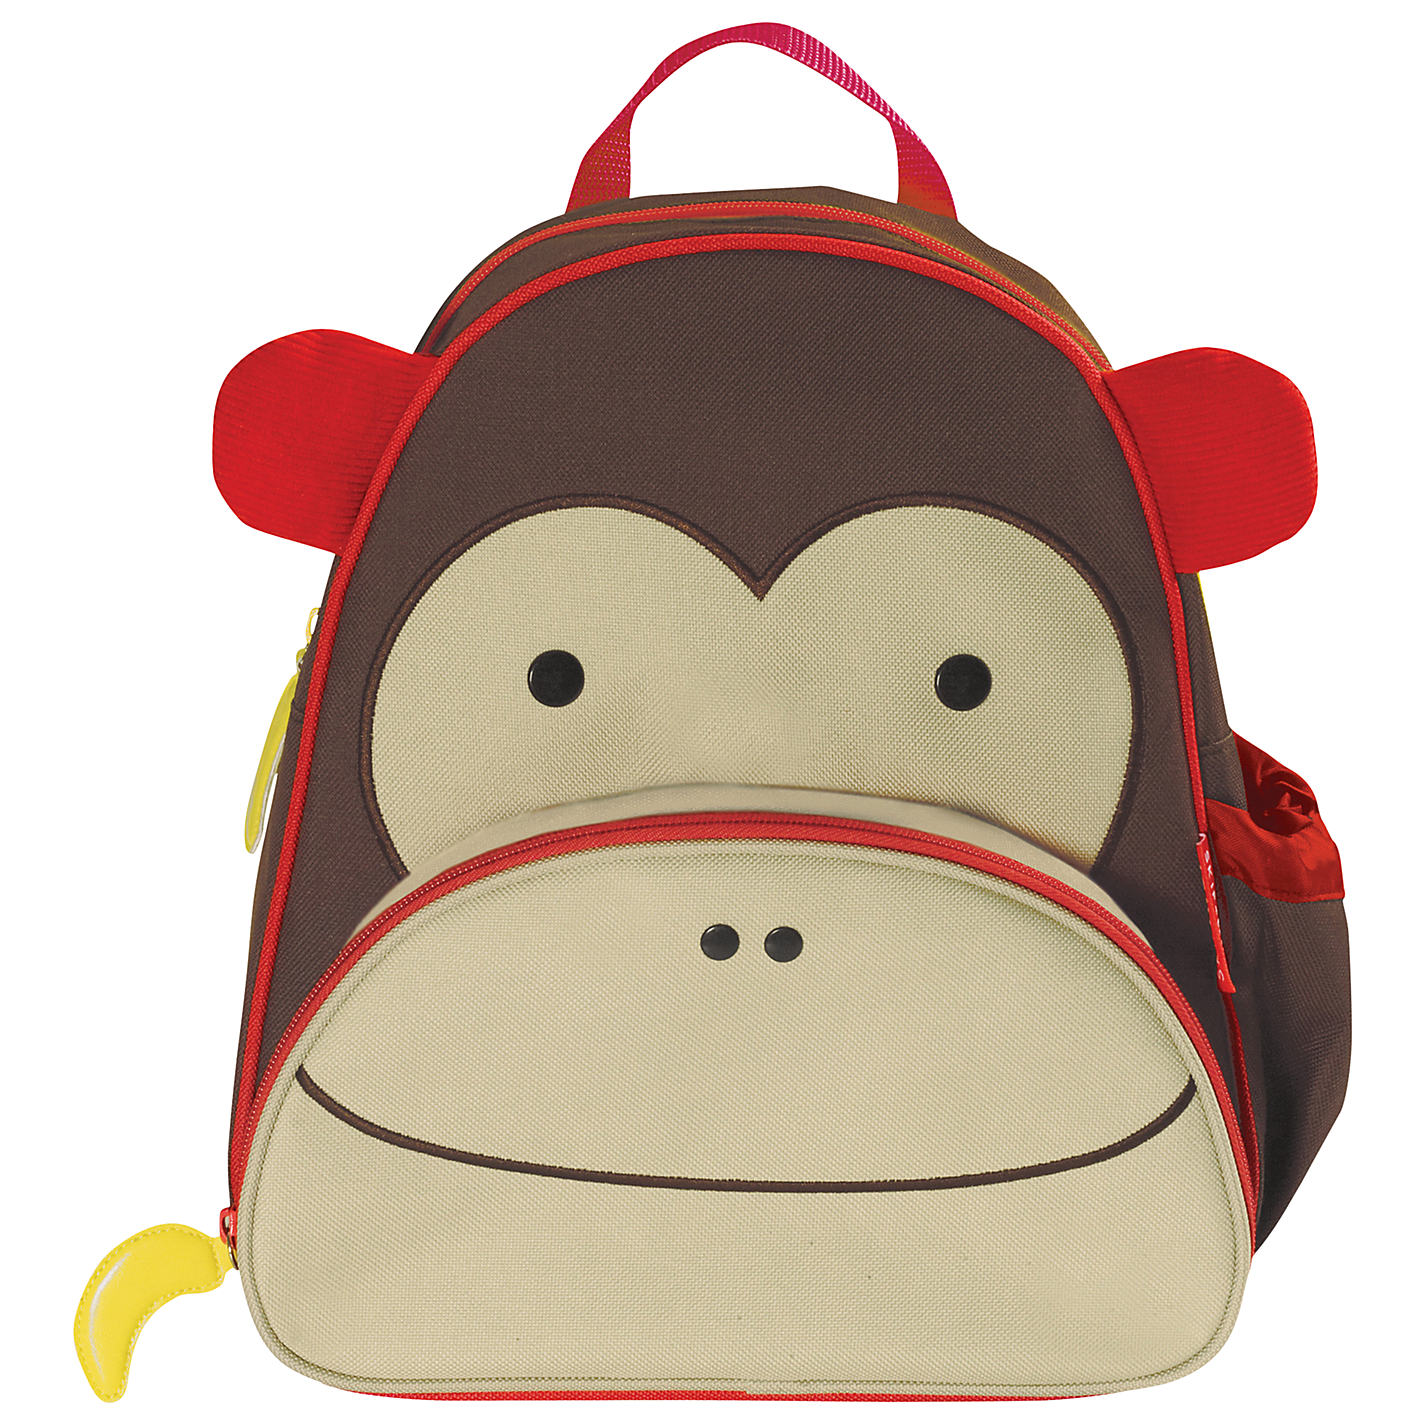 Top 10 Desirable Backpacks Designs For Kids